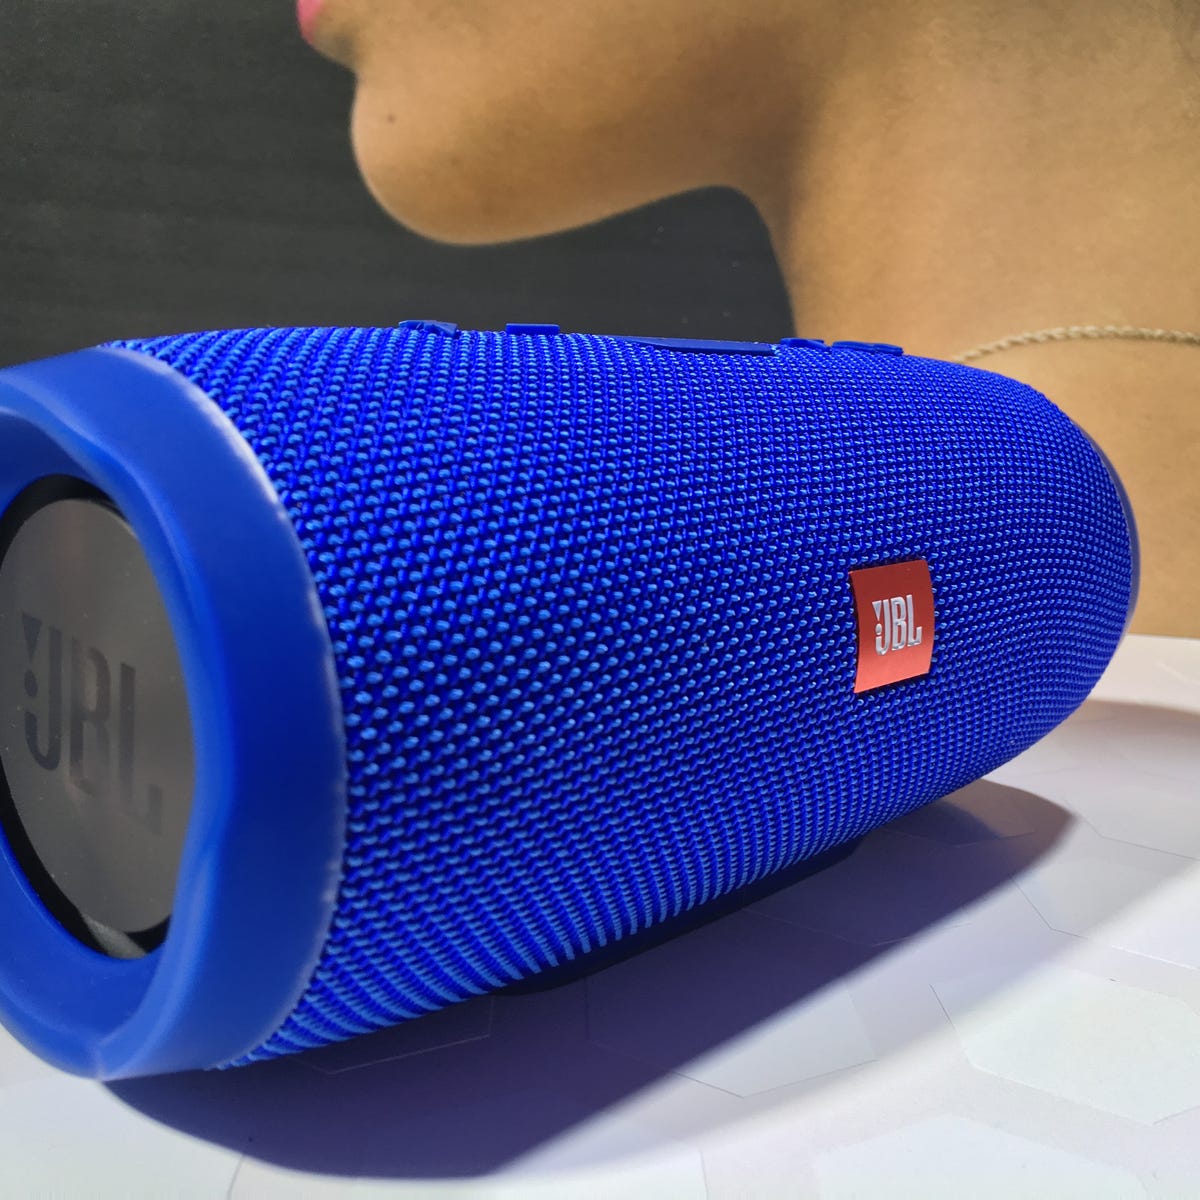 JBL Charge 3 review: Waterproof Bluetooth plays louder, but sound quality takes a step back - CNET